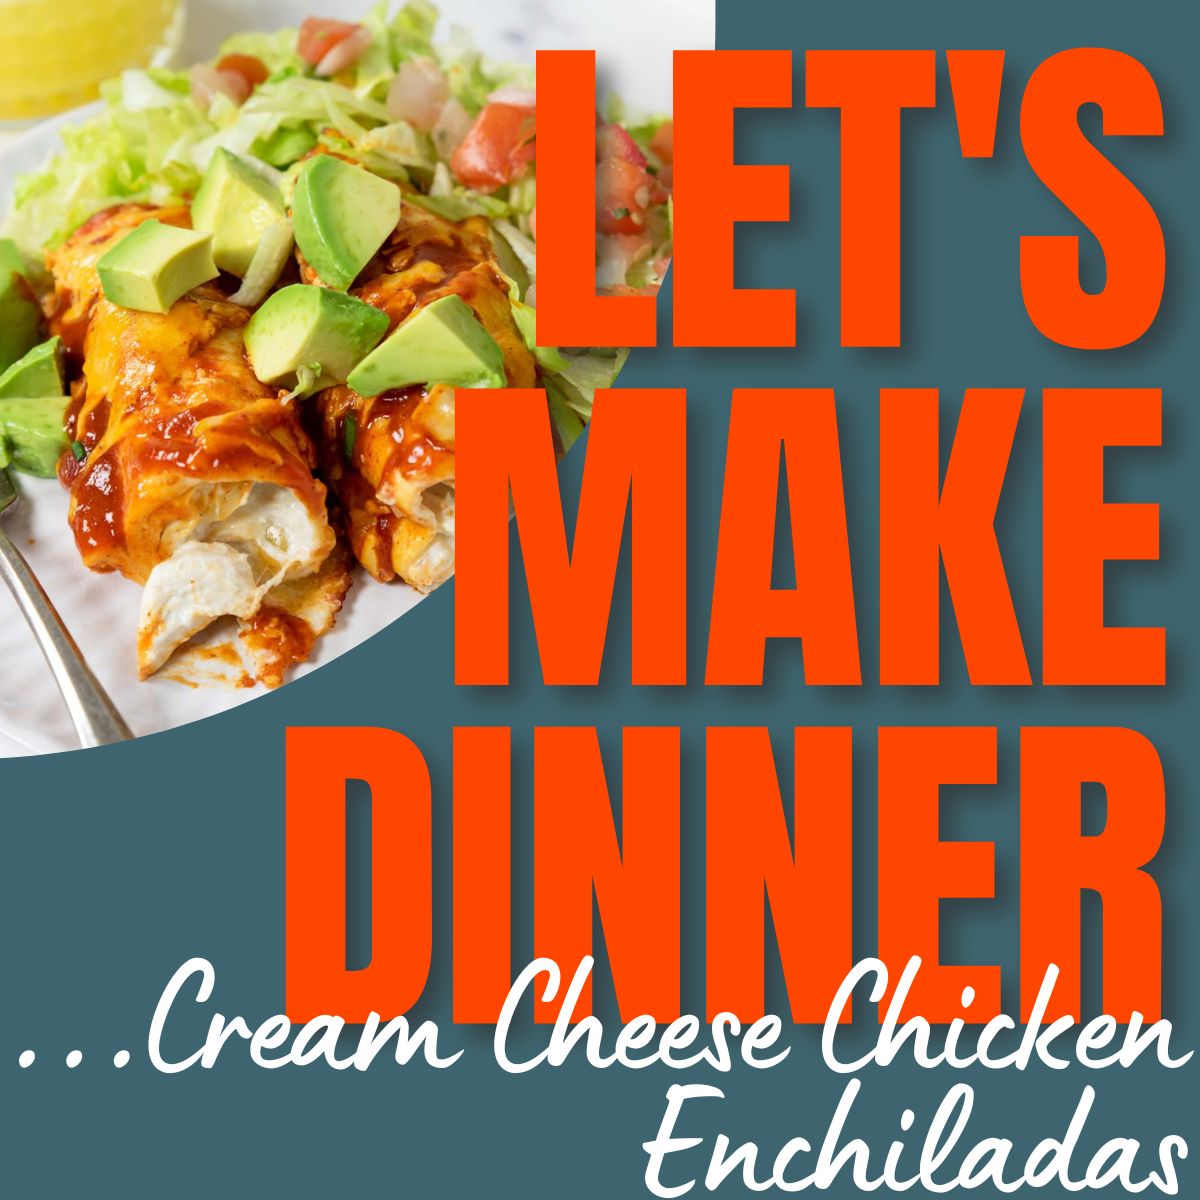 cream cheese chicken enchiladas with text overlay for Let's Make Dinner